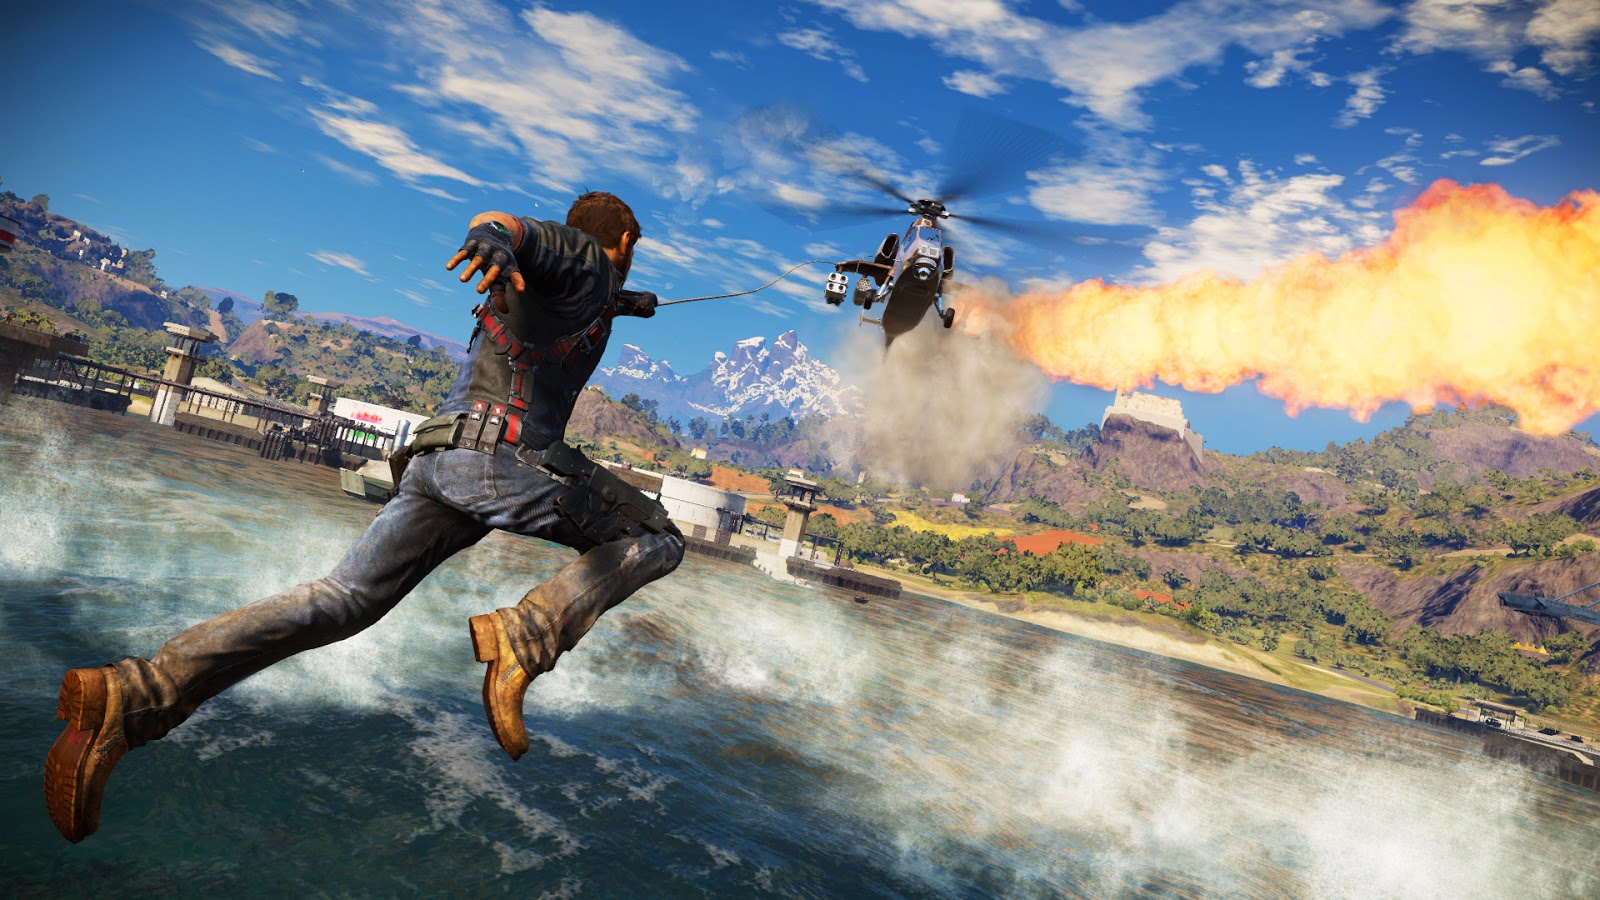 Check Out The Technology behind Just Cause 3 - We Know Gamers